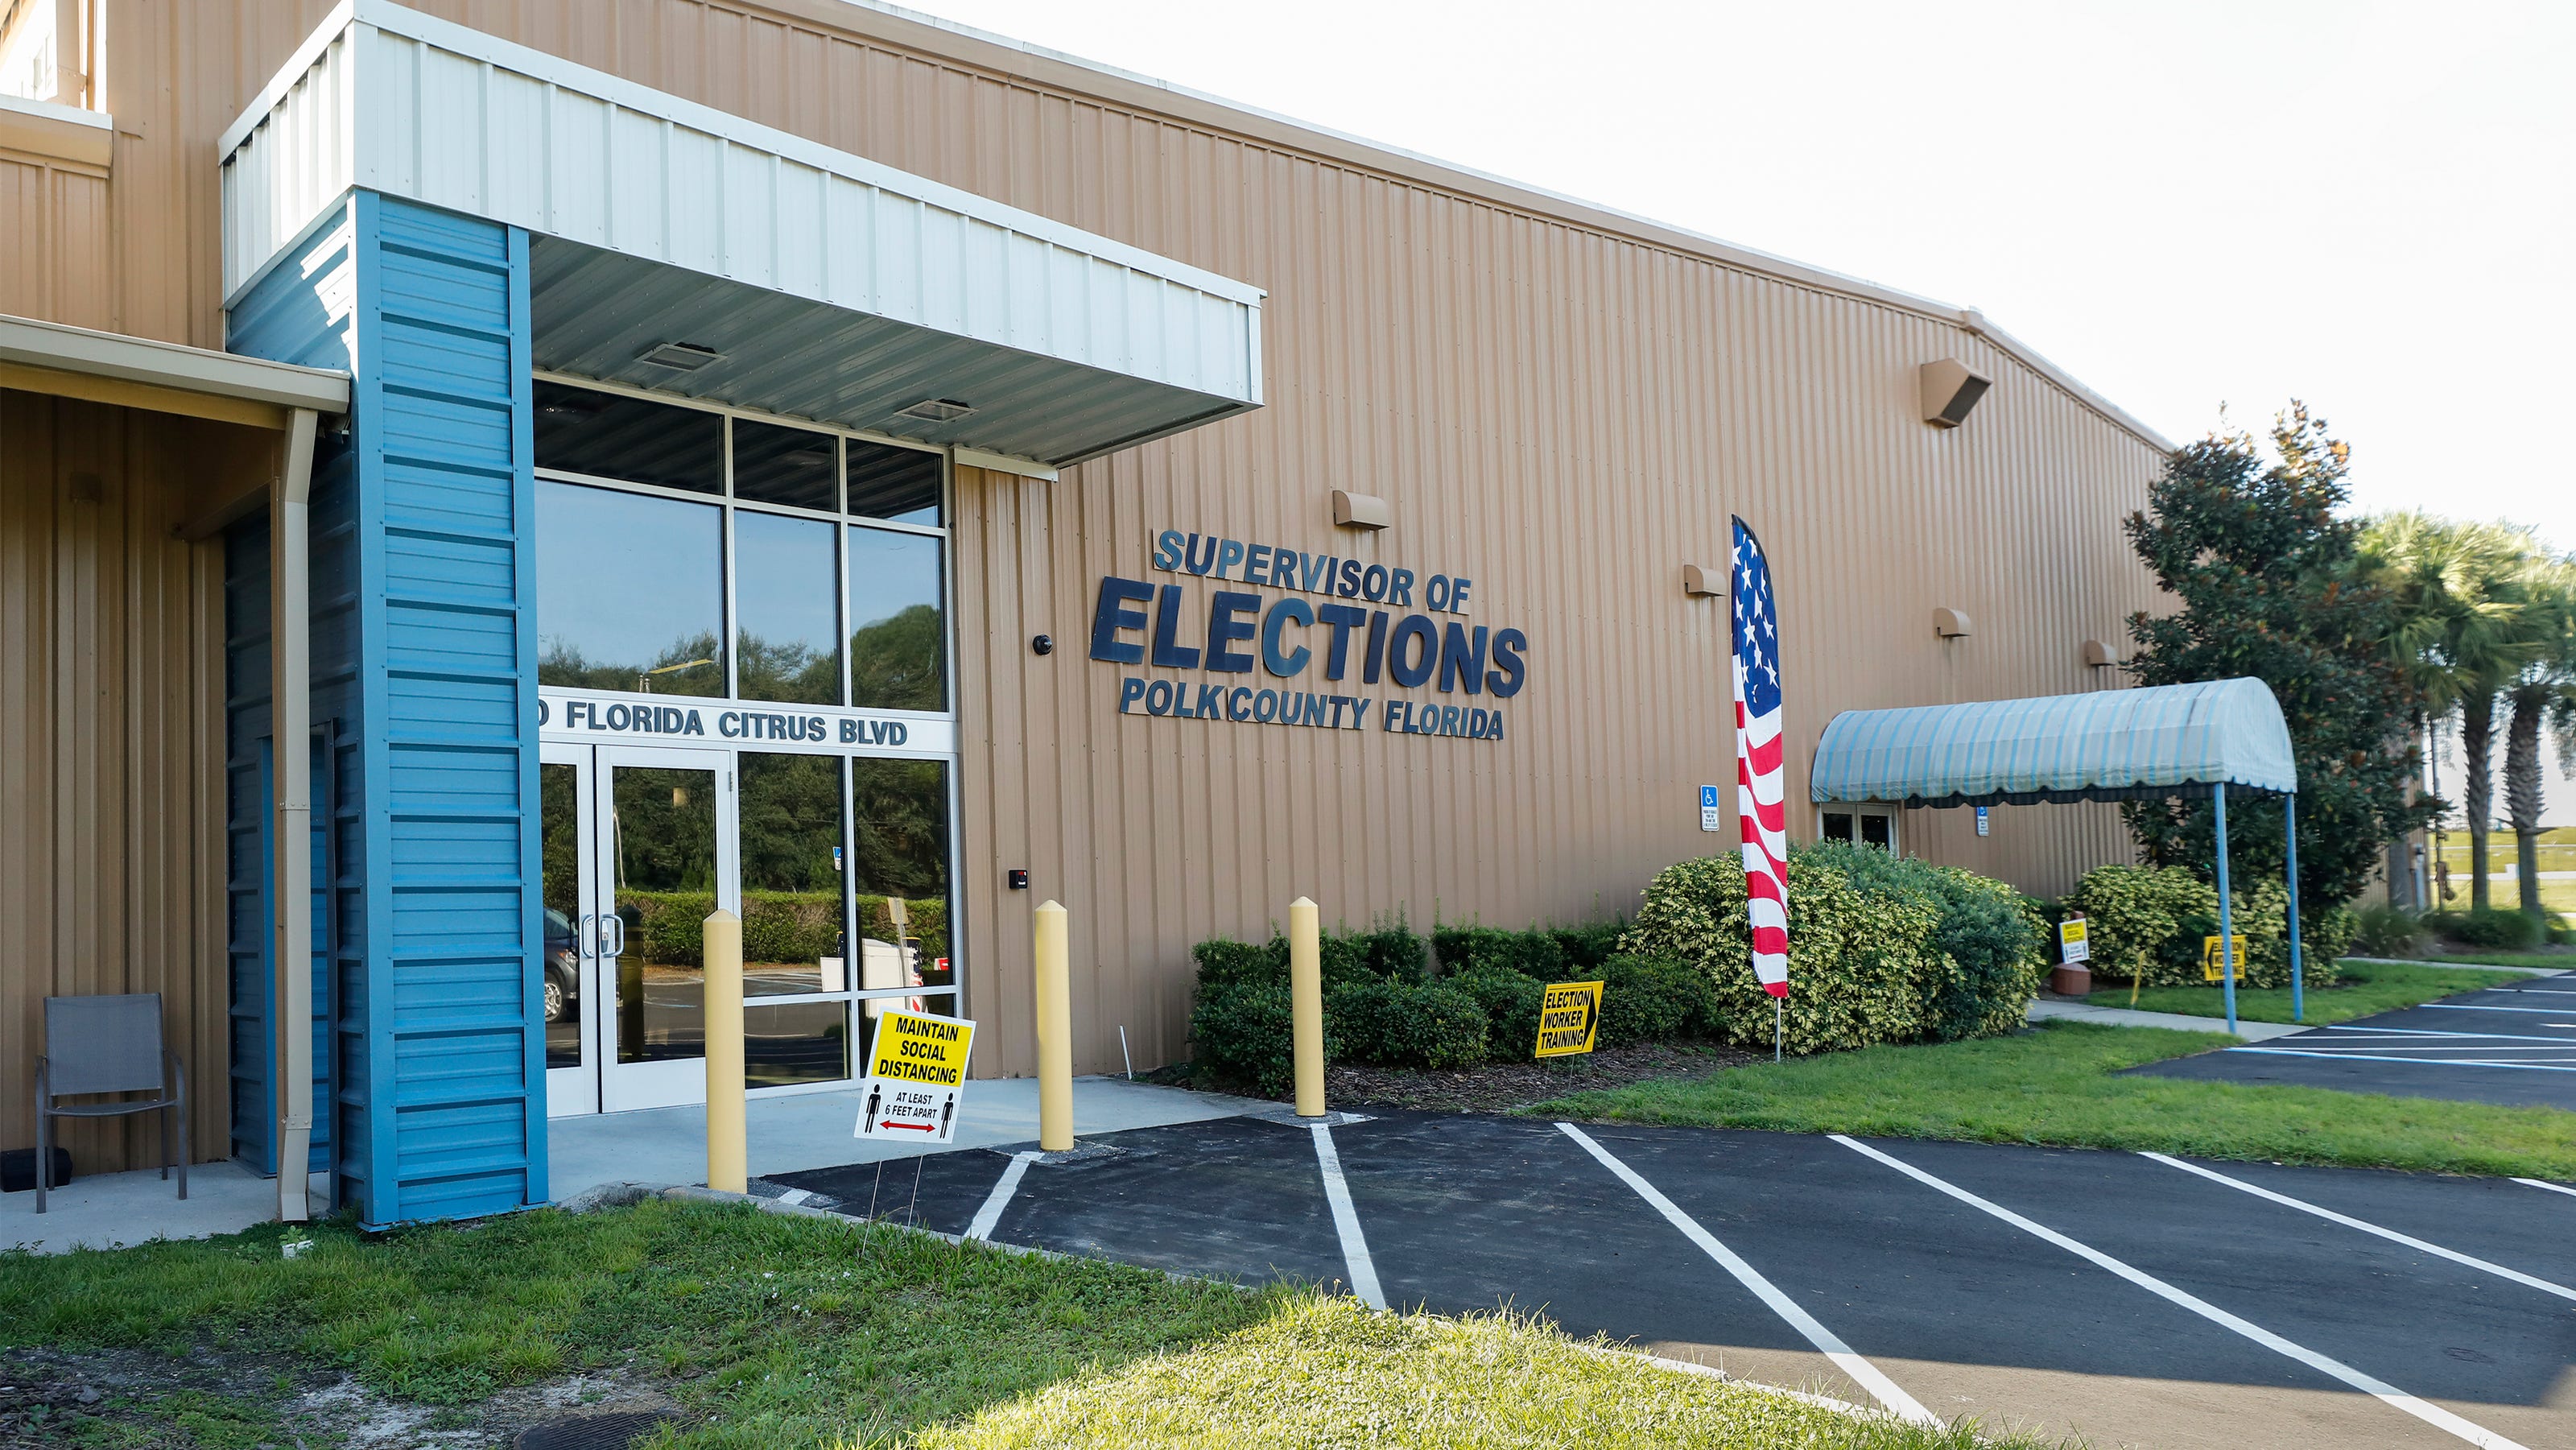 Polk County elections supervisor seeks poll workers, recruitment event